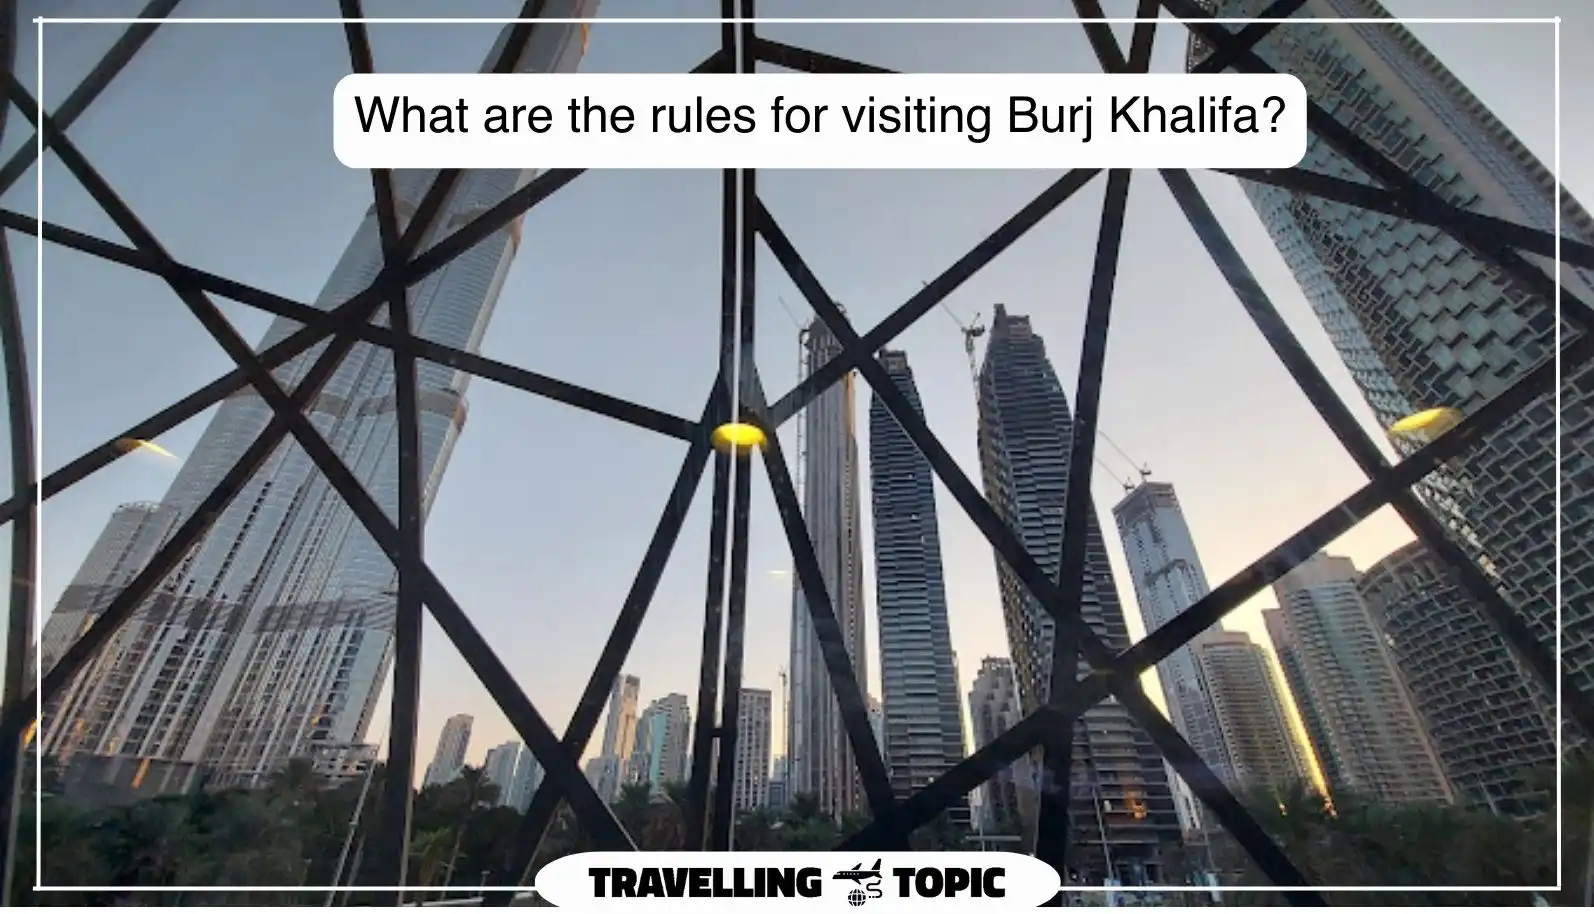 What are the rules for visiting Burj Khalifa